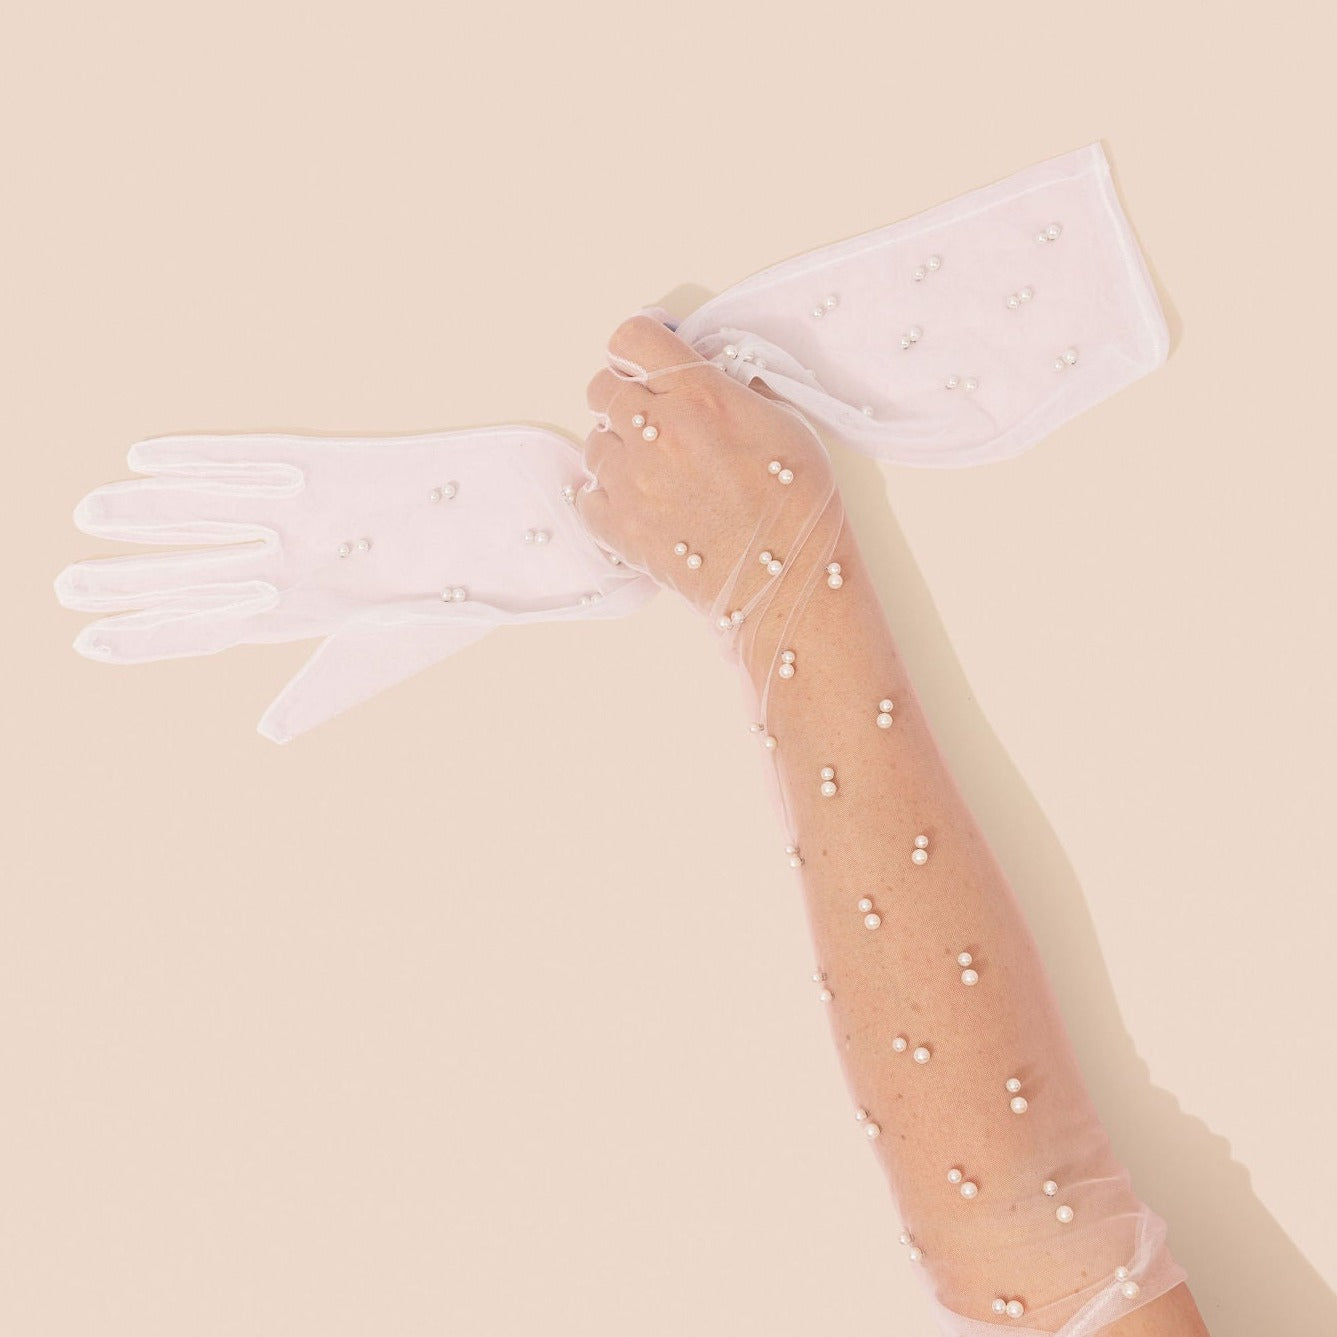 Elbow length chiffon fingered gloves (50cm) with pearl bead detailing